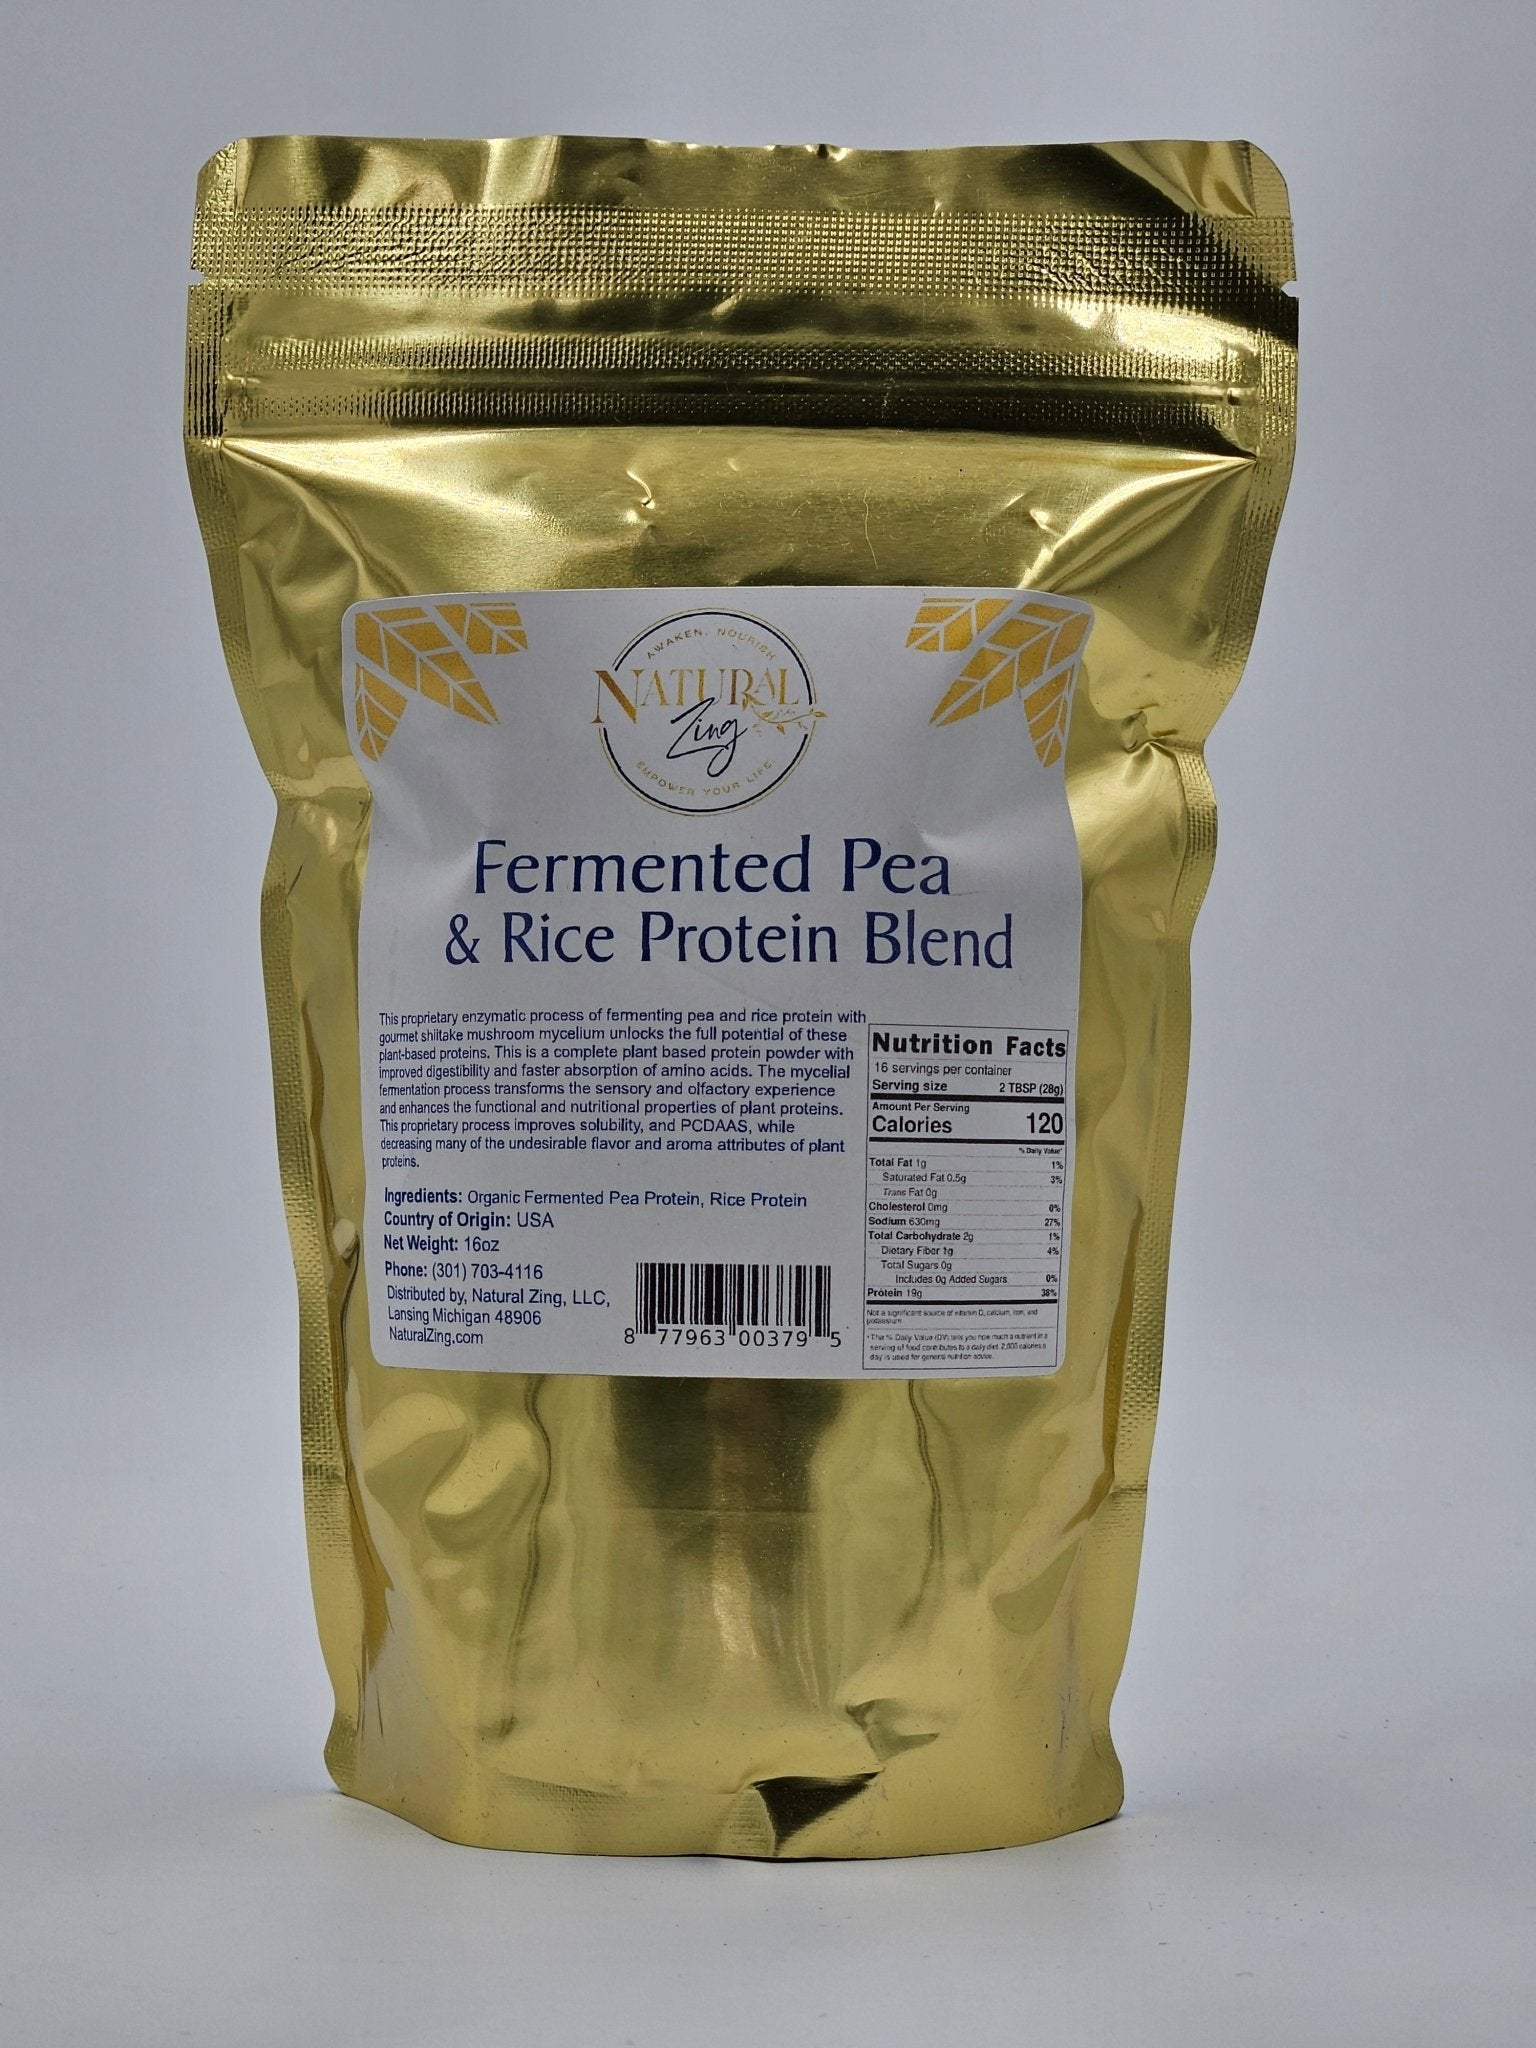 Fermented Brown Rice/Pea Protein Blend 16 oz